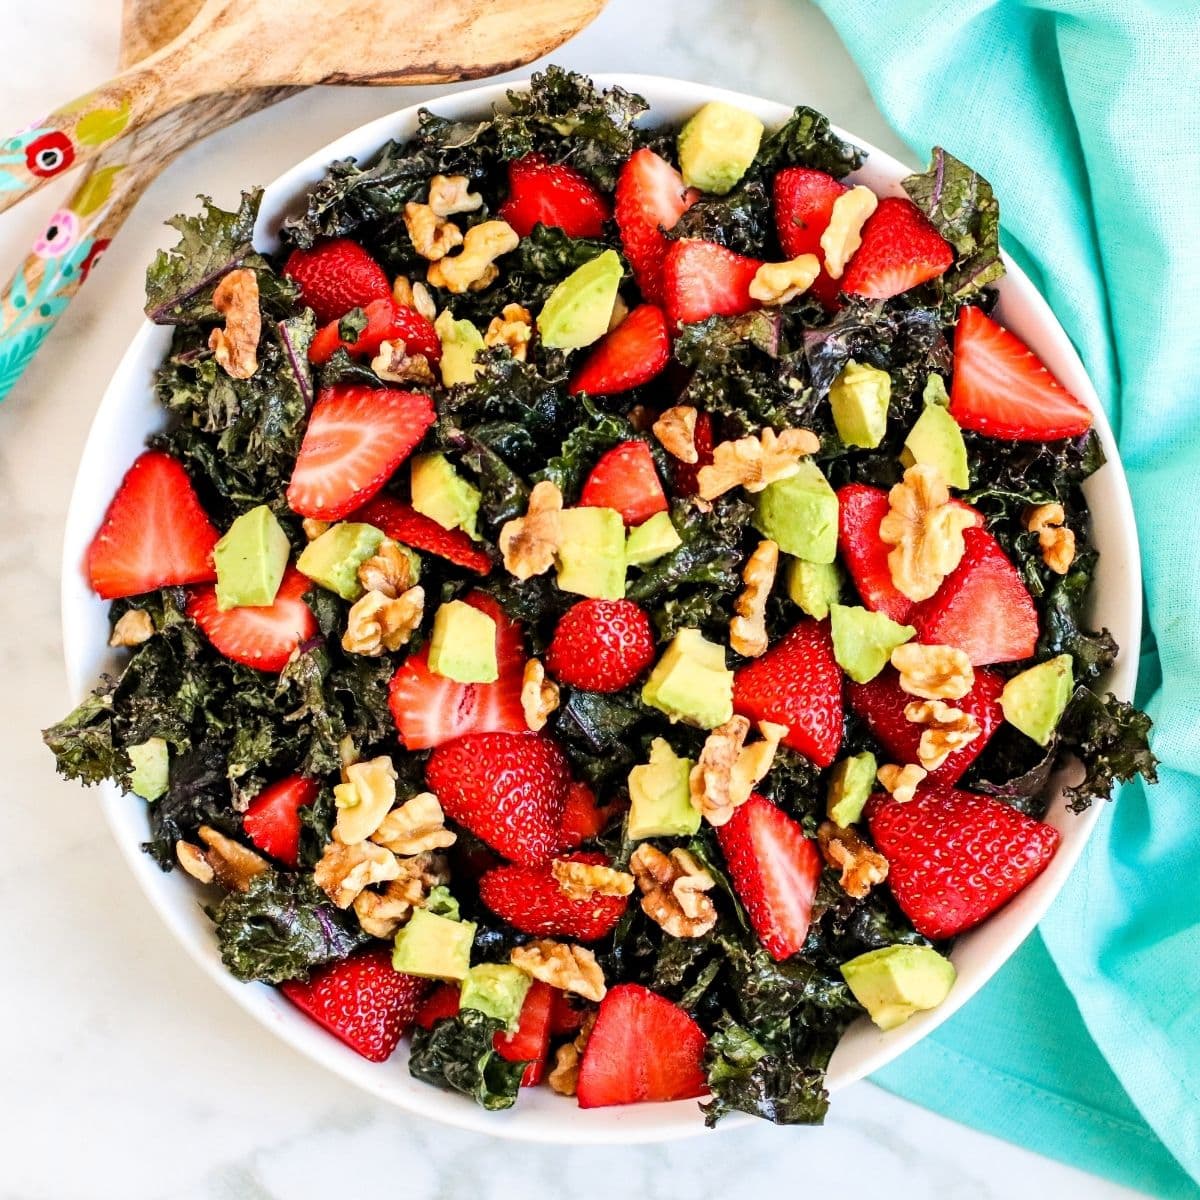 Overhead of serving bowl of kale salad topped with sliced strawberries, avocado cubes, and walnuts